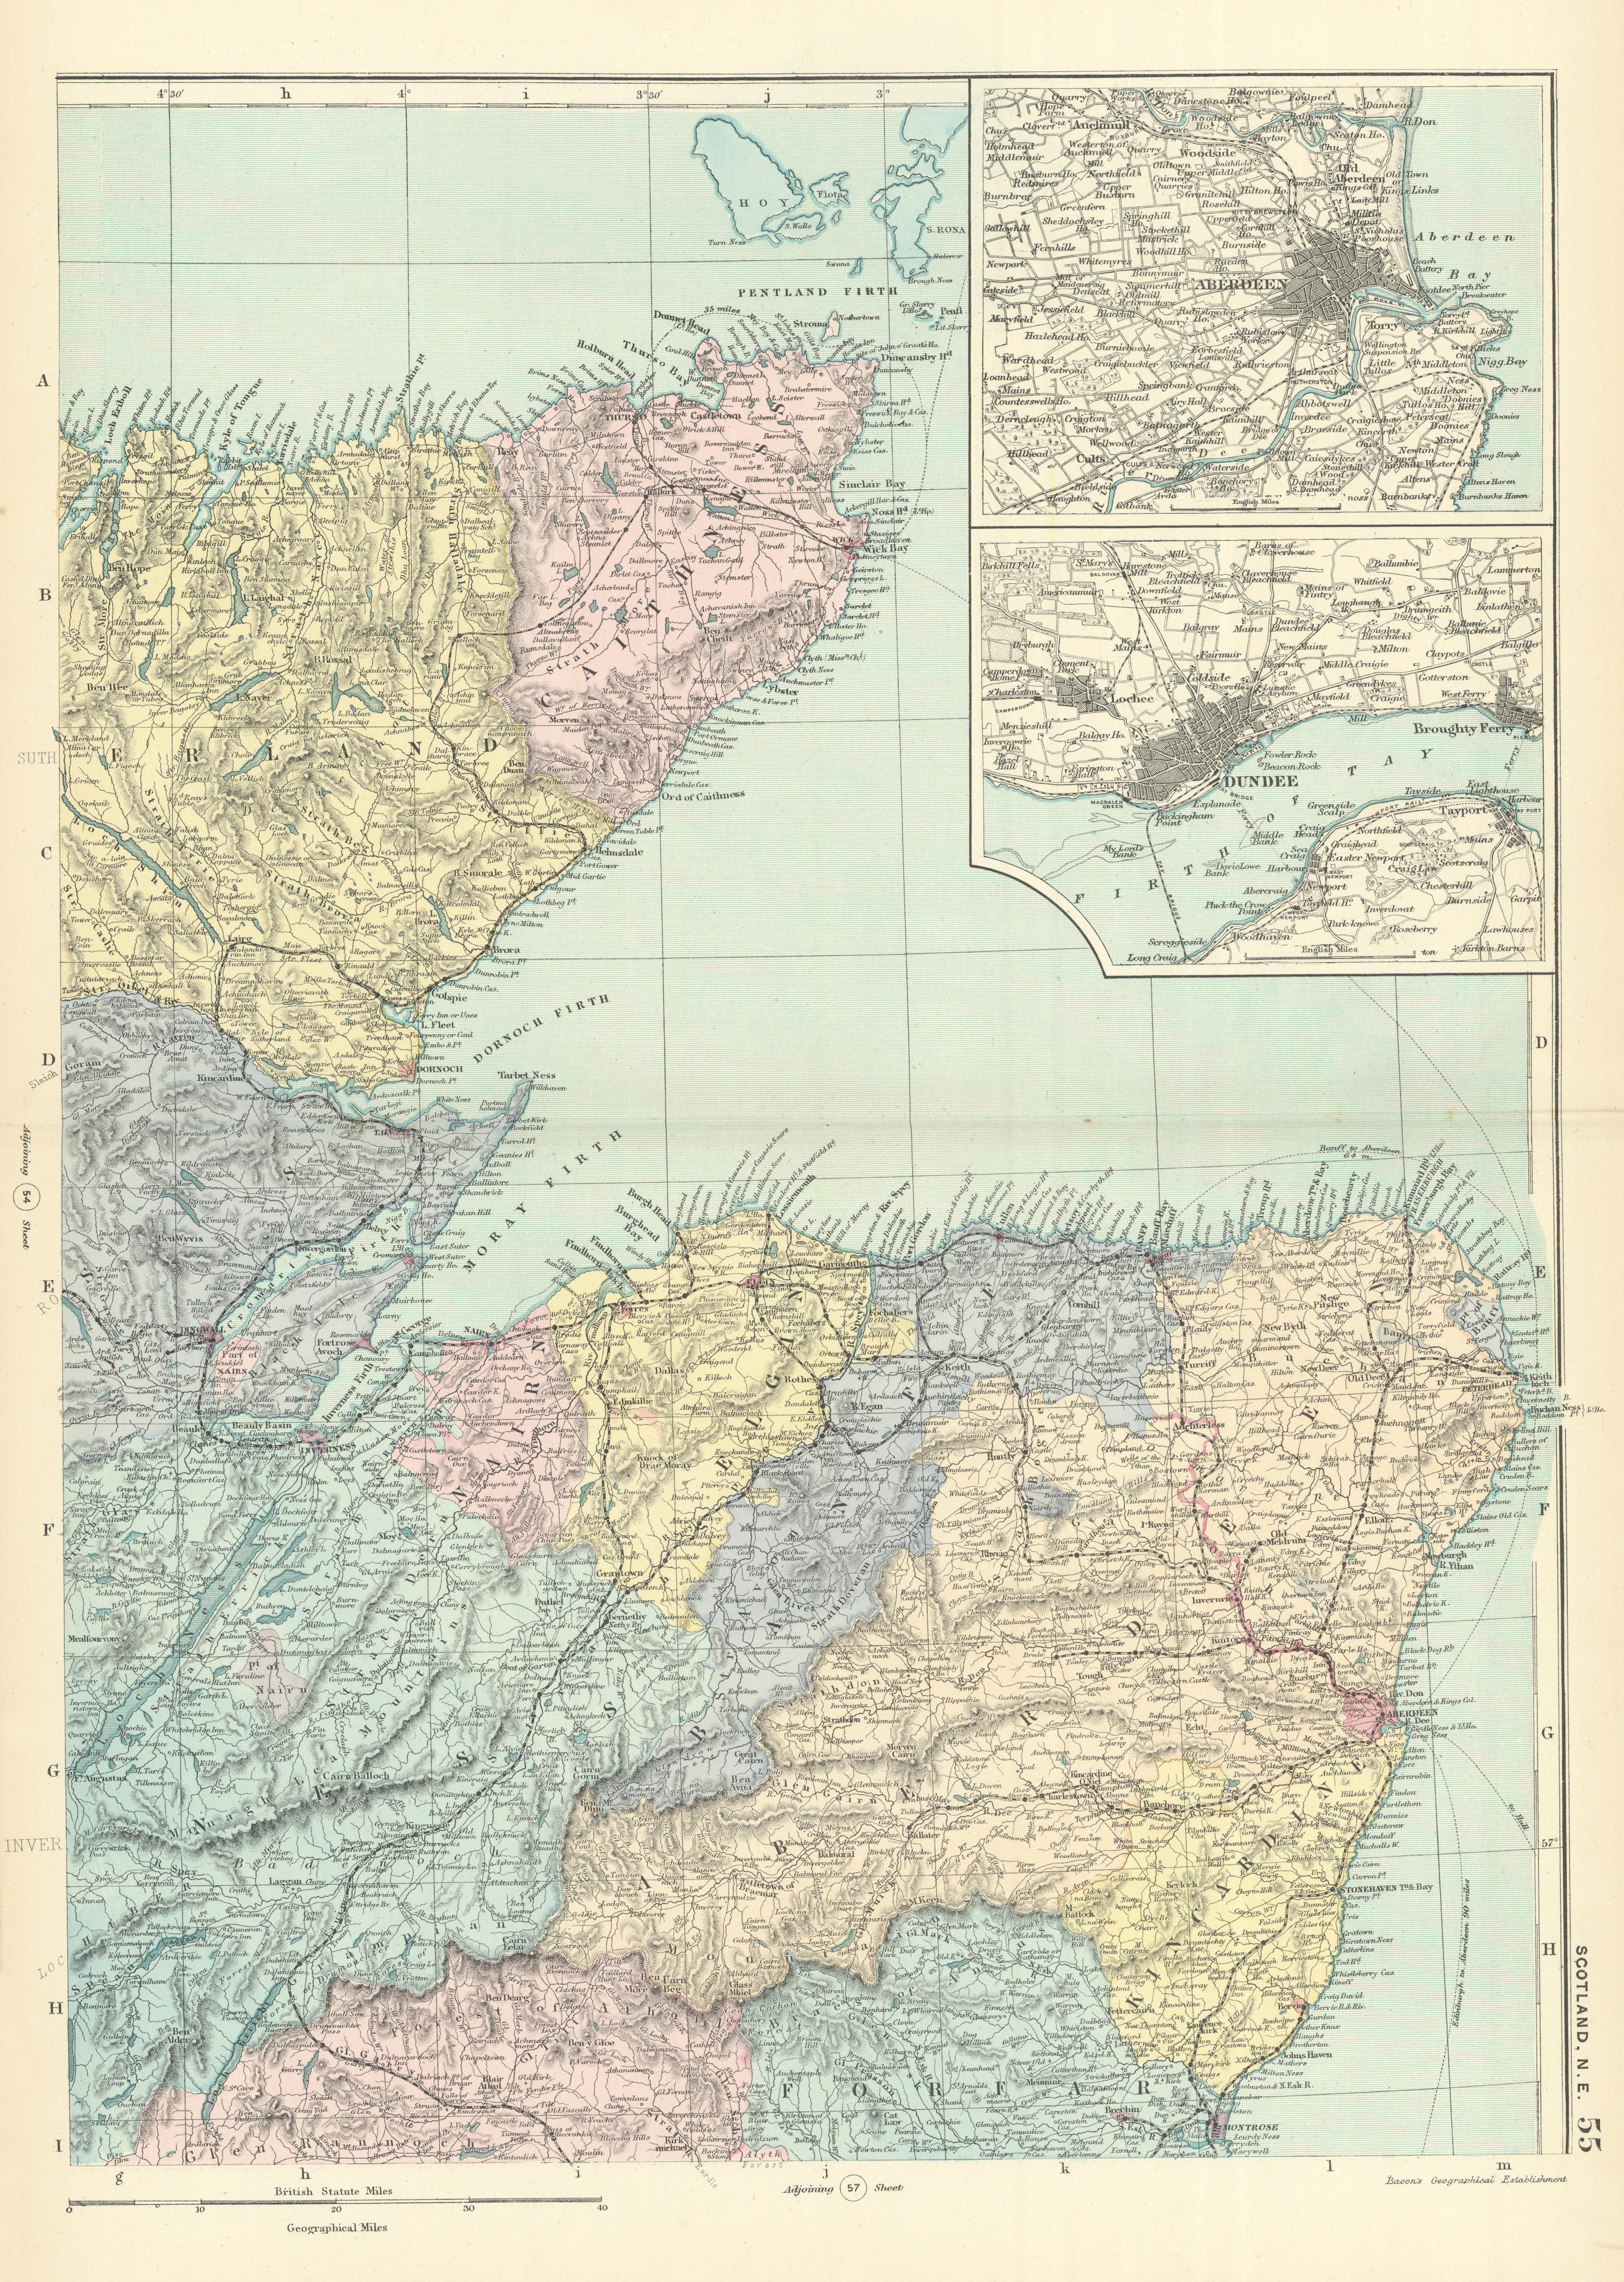 Associate Product SCOTLAND (North East) Highlands Aberdeen Inverness Banff GW BACON 1891 old map